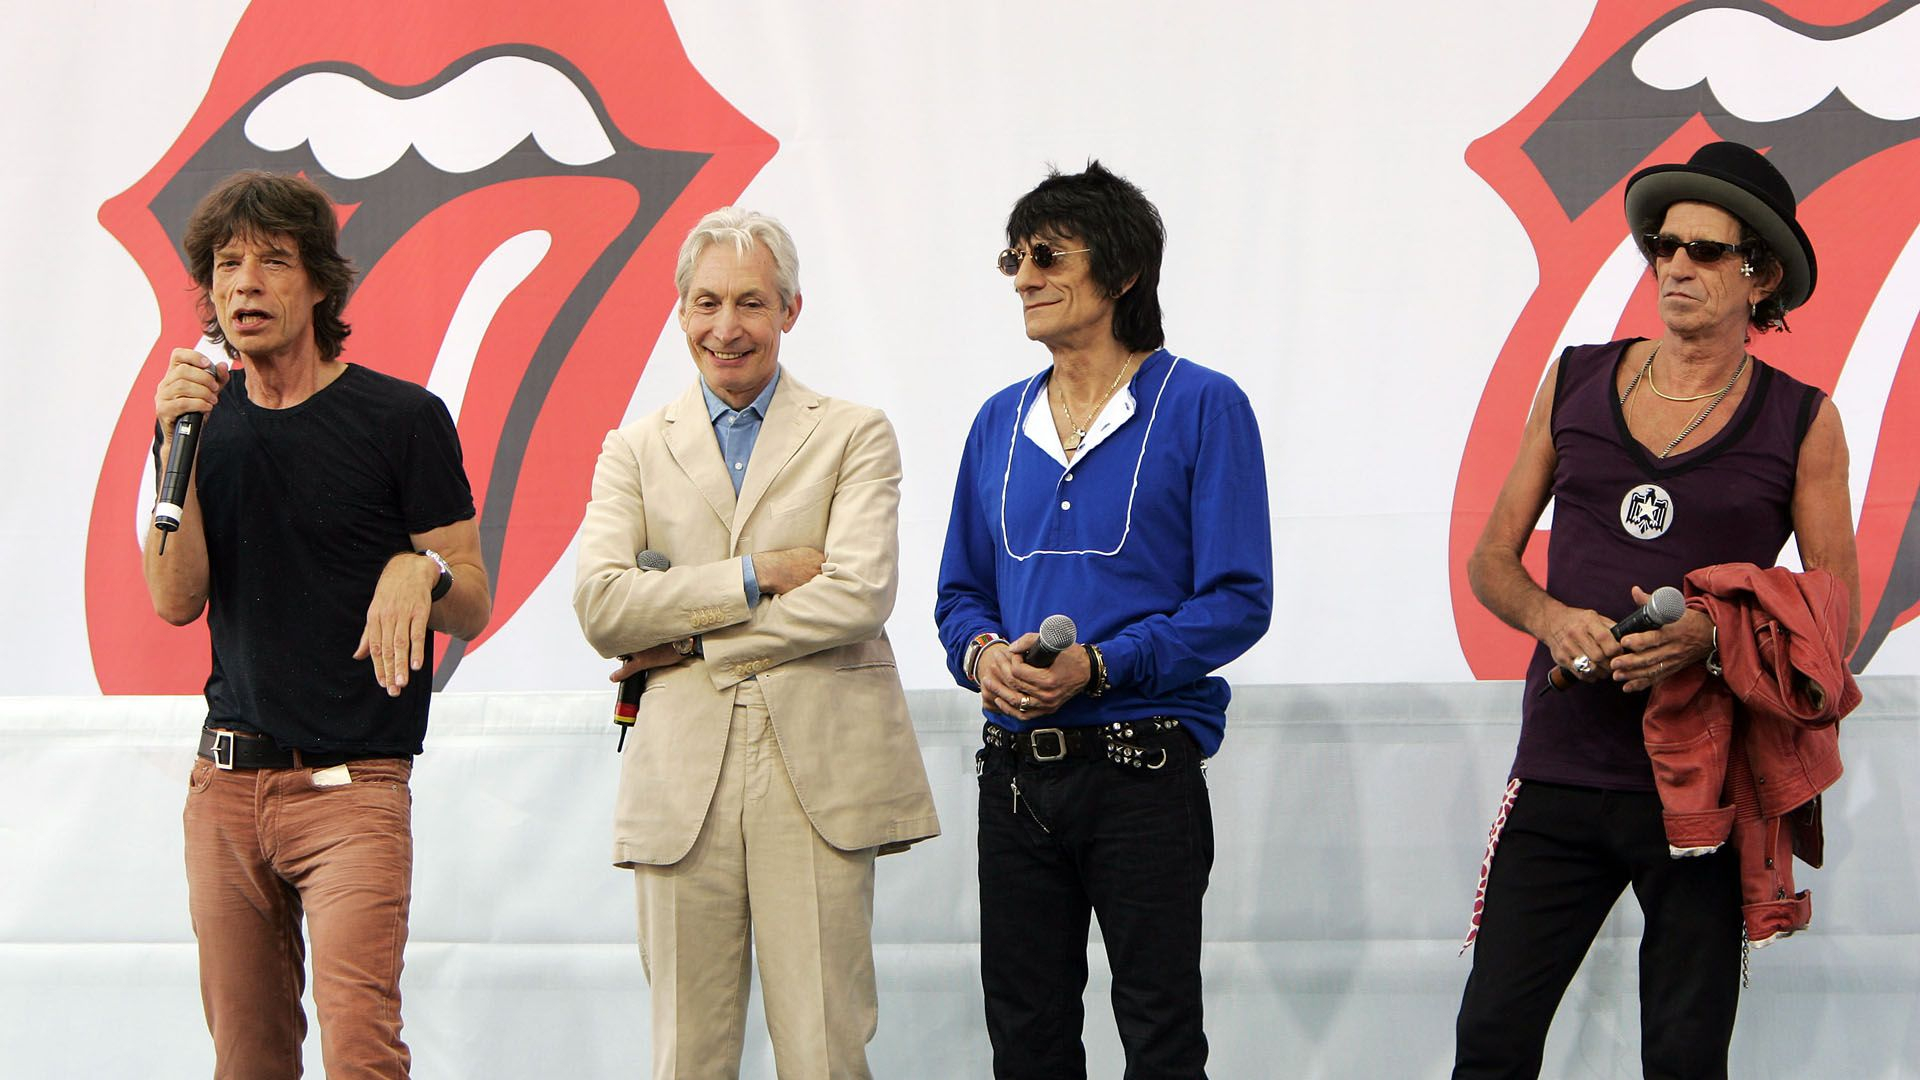 1920x1080 40+ The Rolling Stones HD Wallpapers and Backgrounds